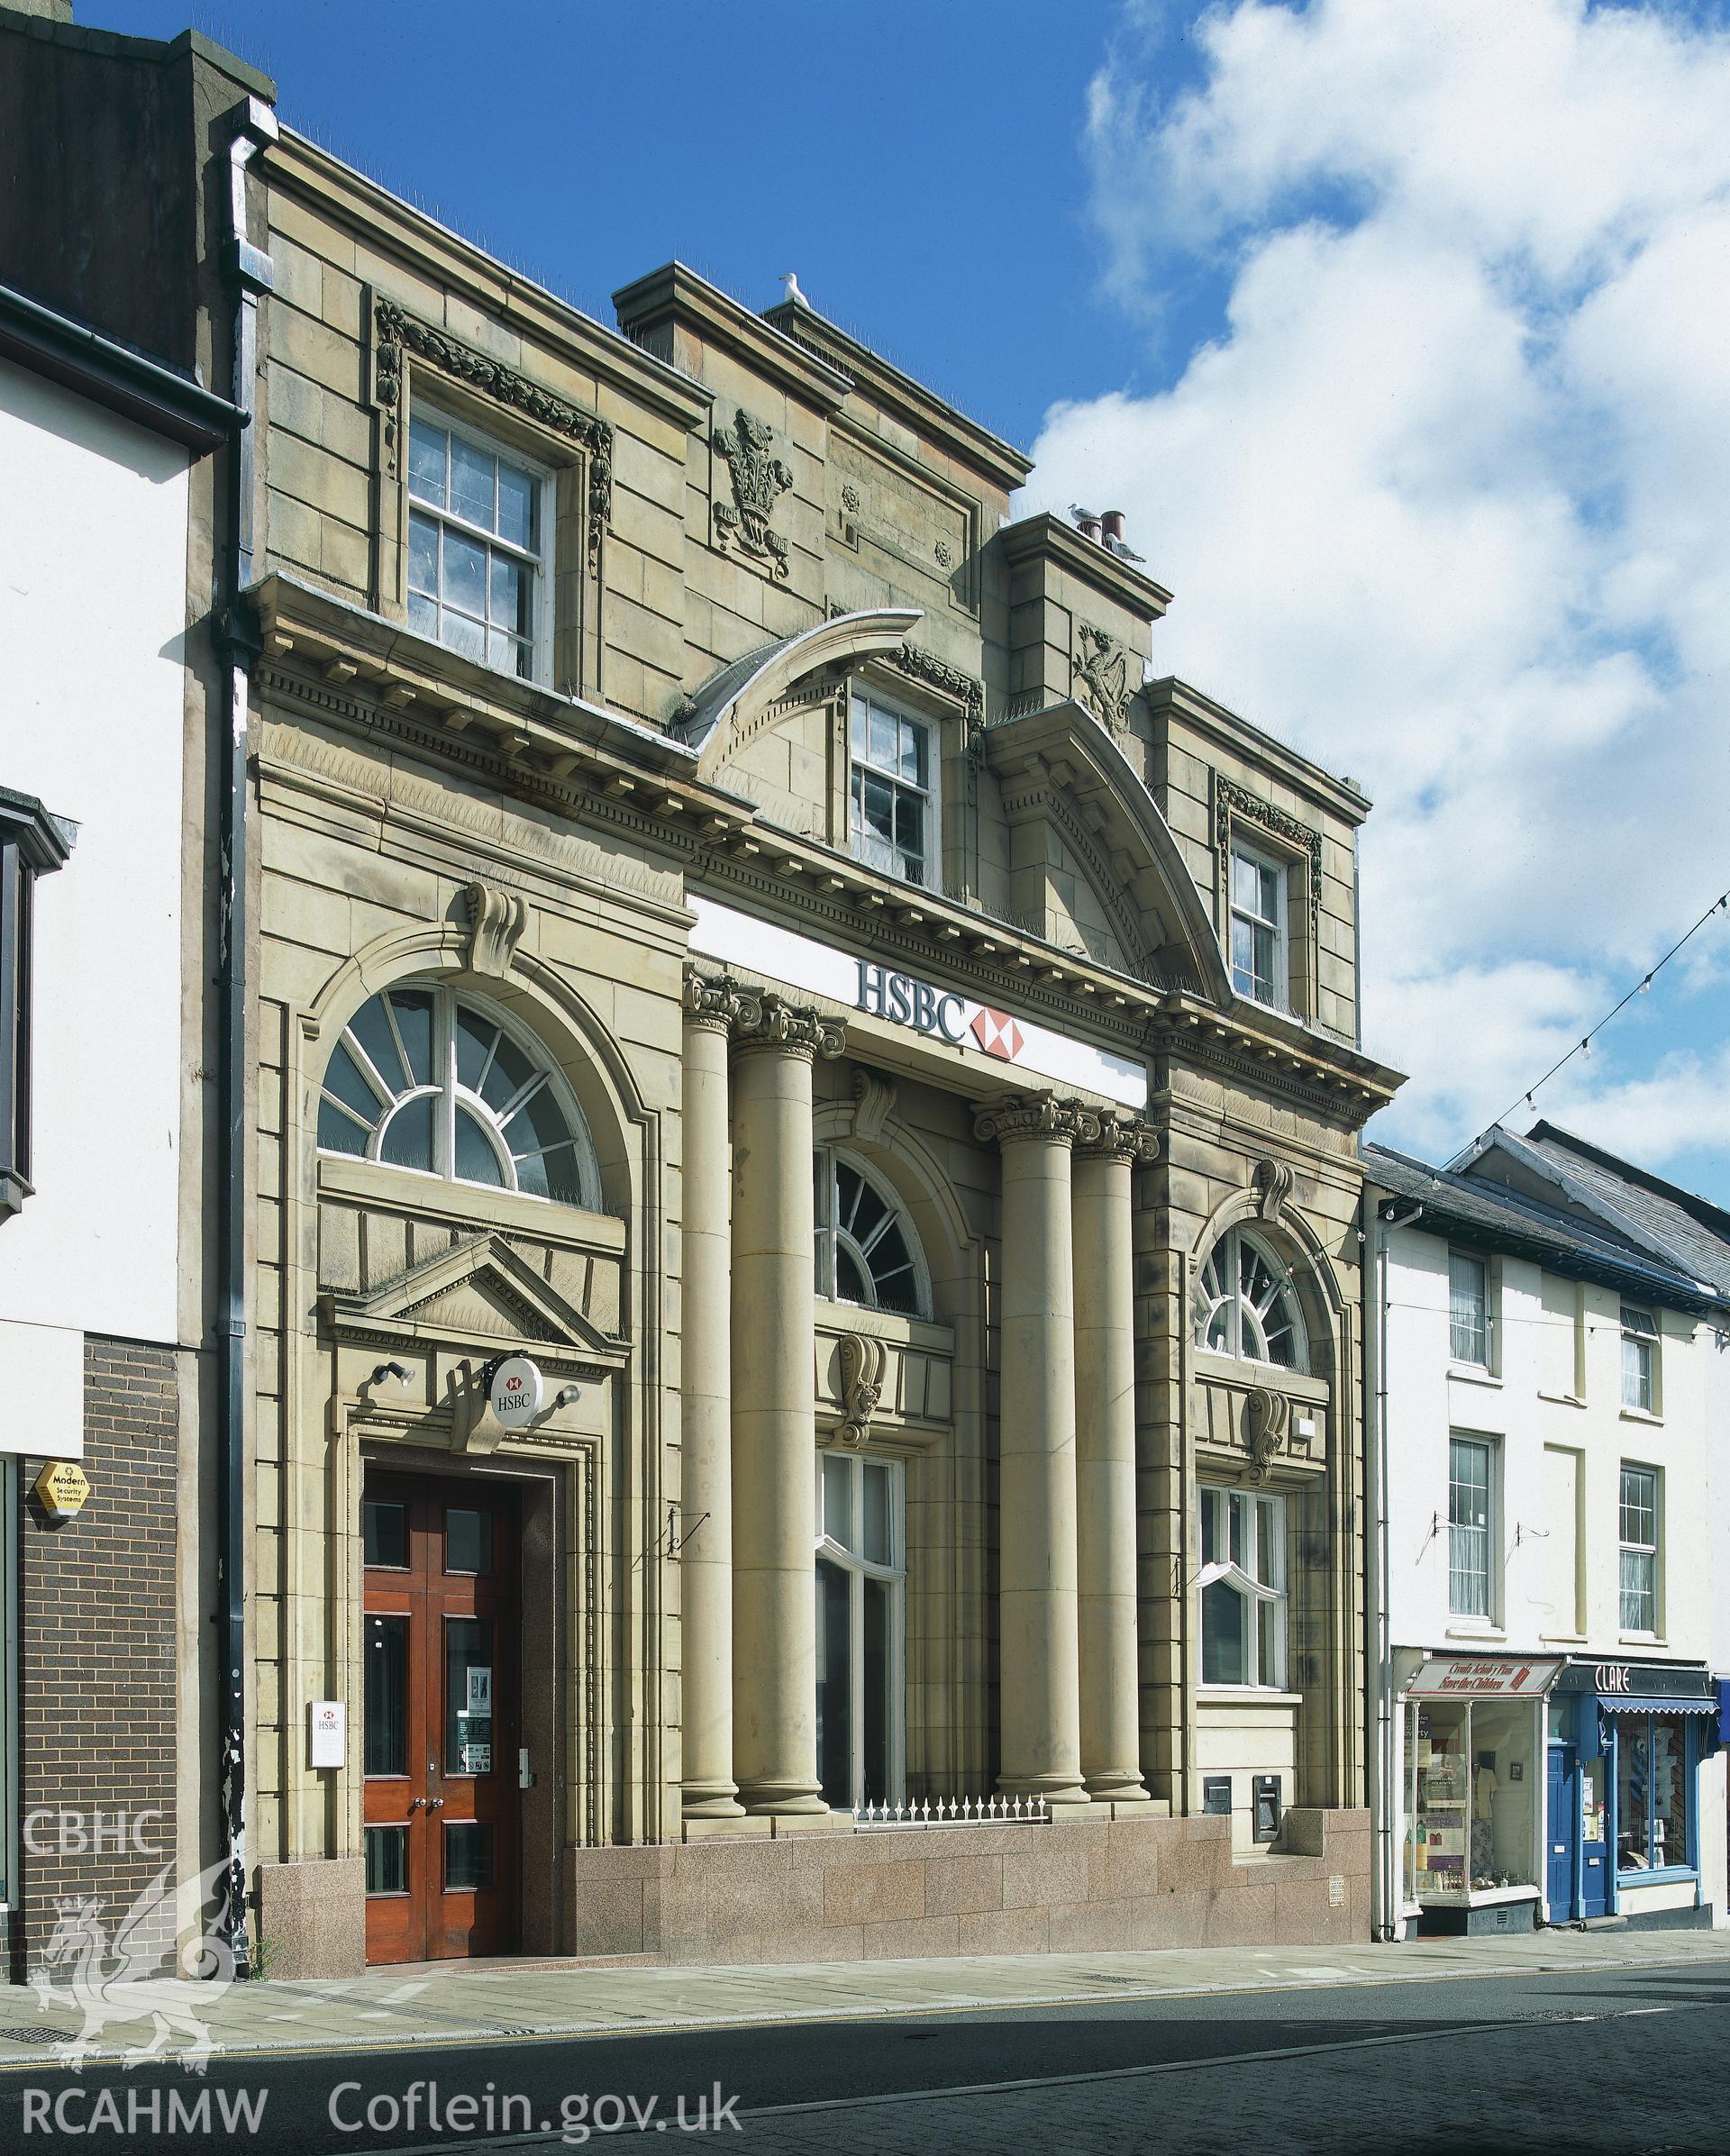 RCAHMW colour transparency showing exterior view of Midland Bank, Aberystwyth